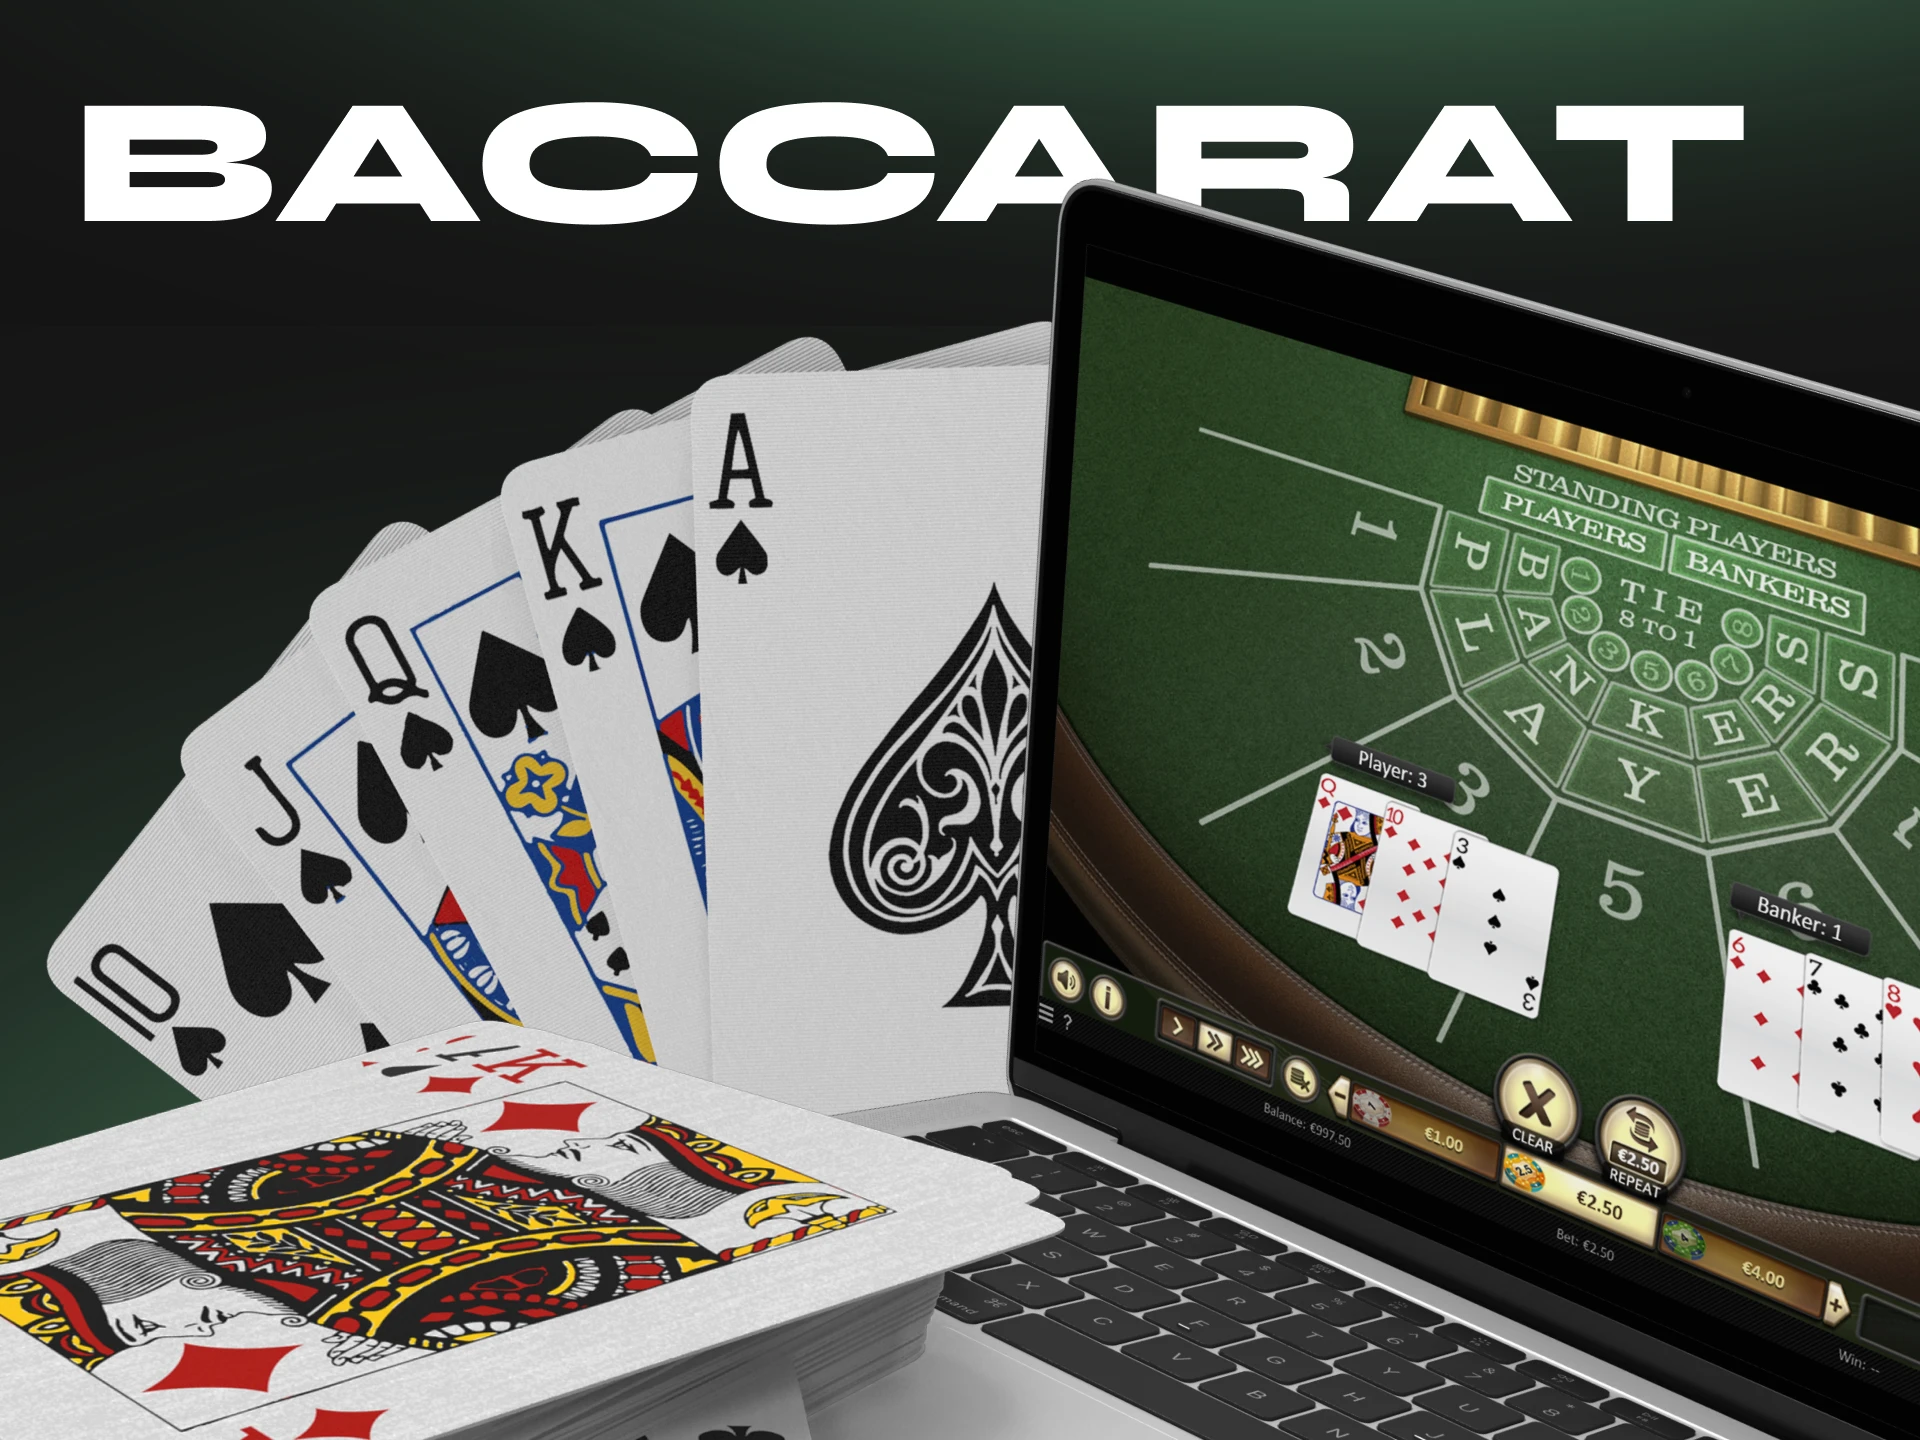 If you like card games, try Baccarat.